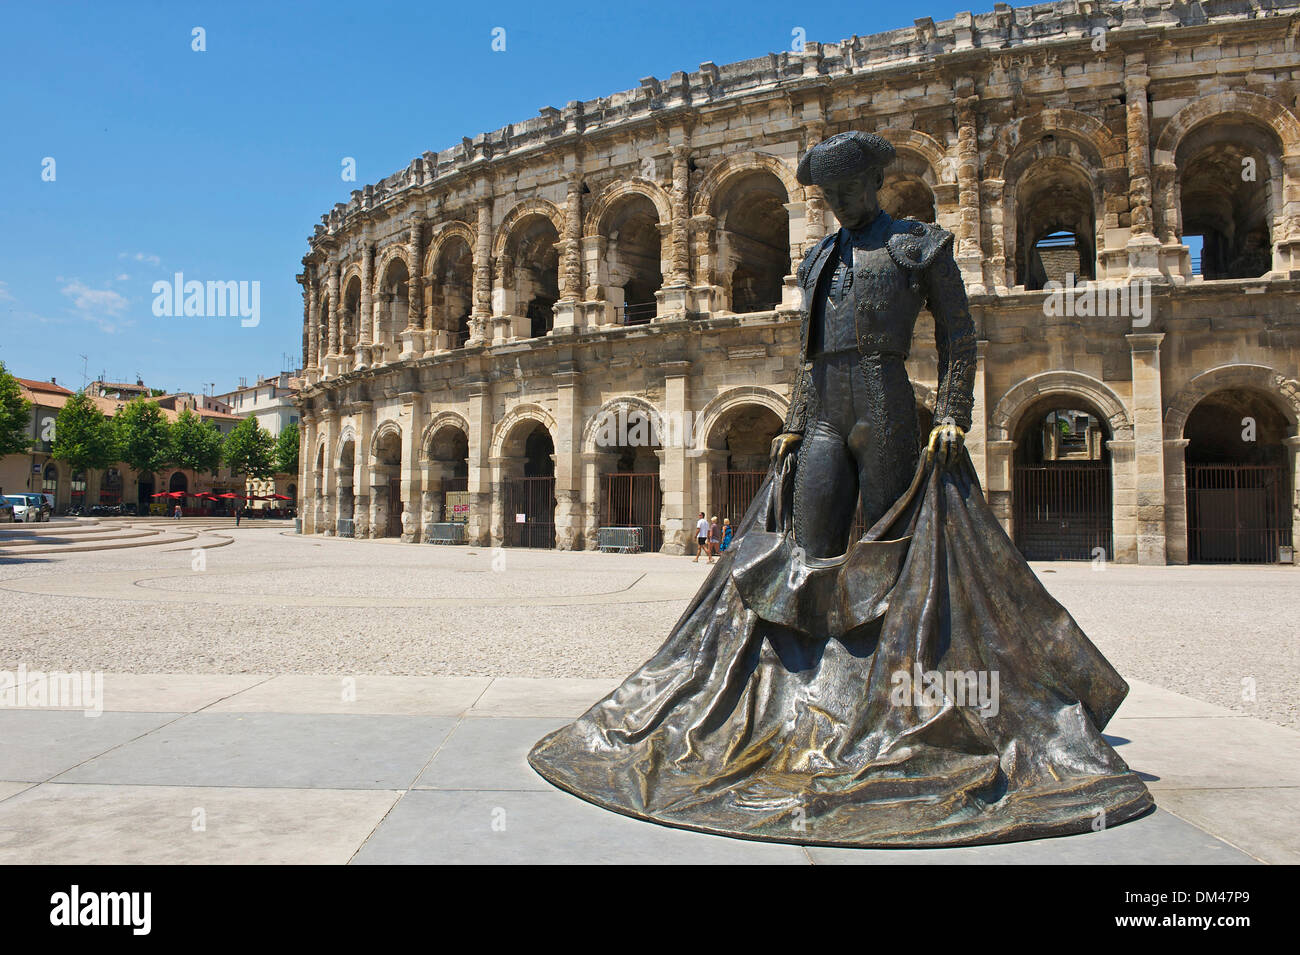 France Europe Provence South of France amphitheater Roman building architecture historical old landmark place of interest Nimes Stock Photo